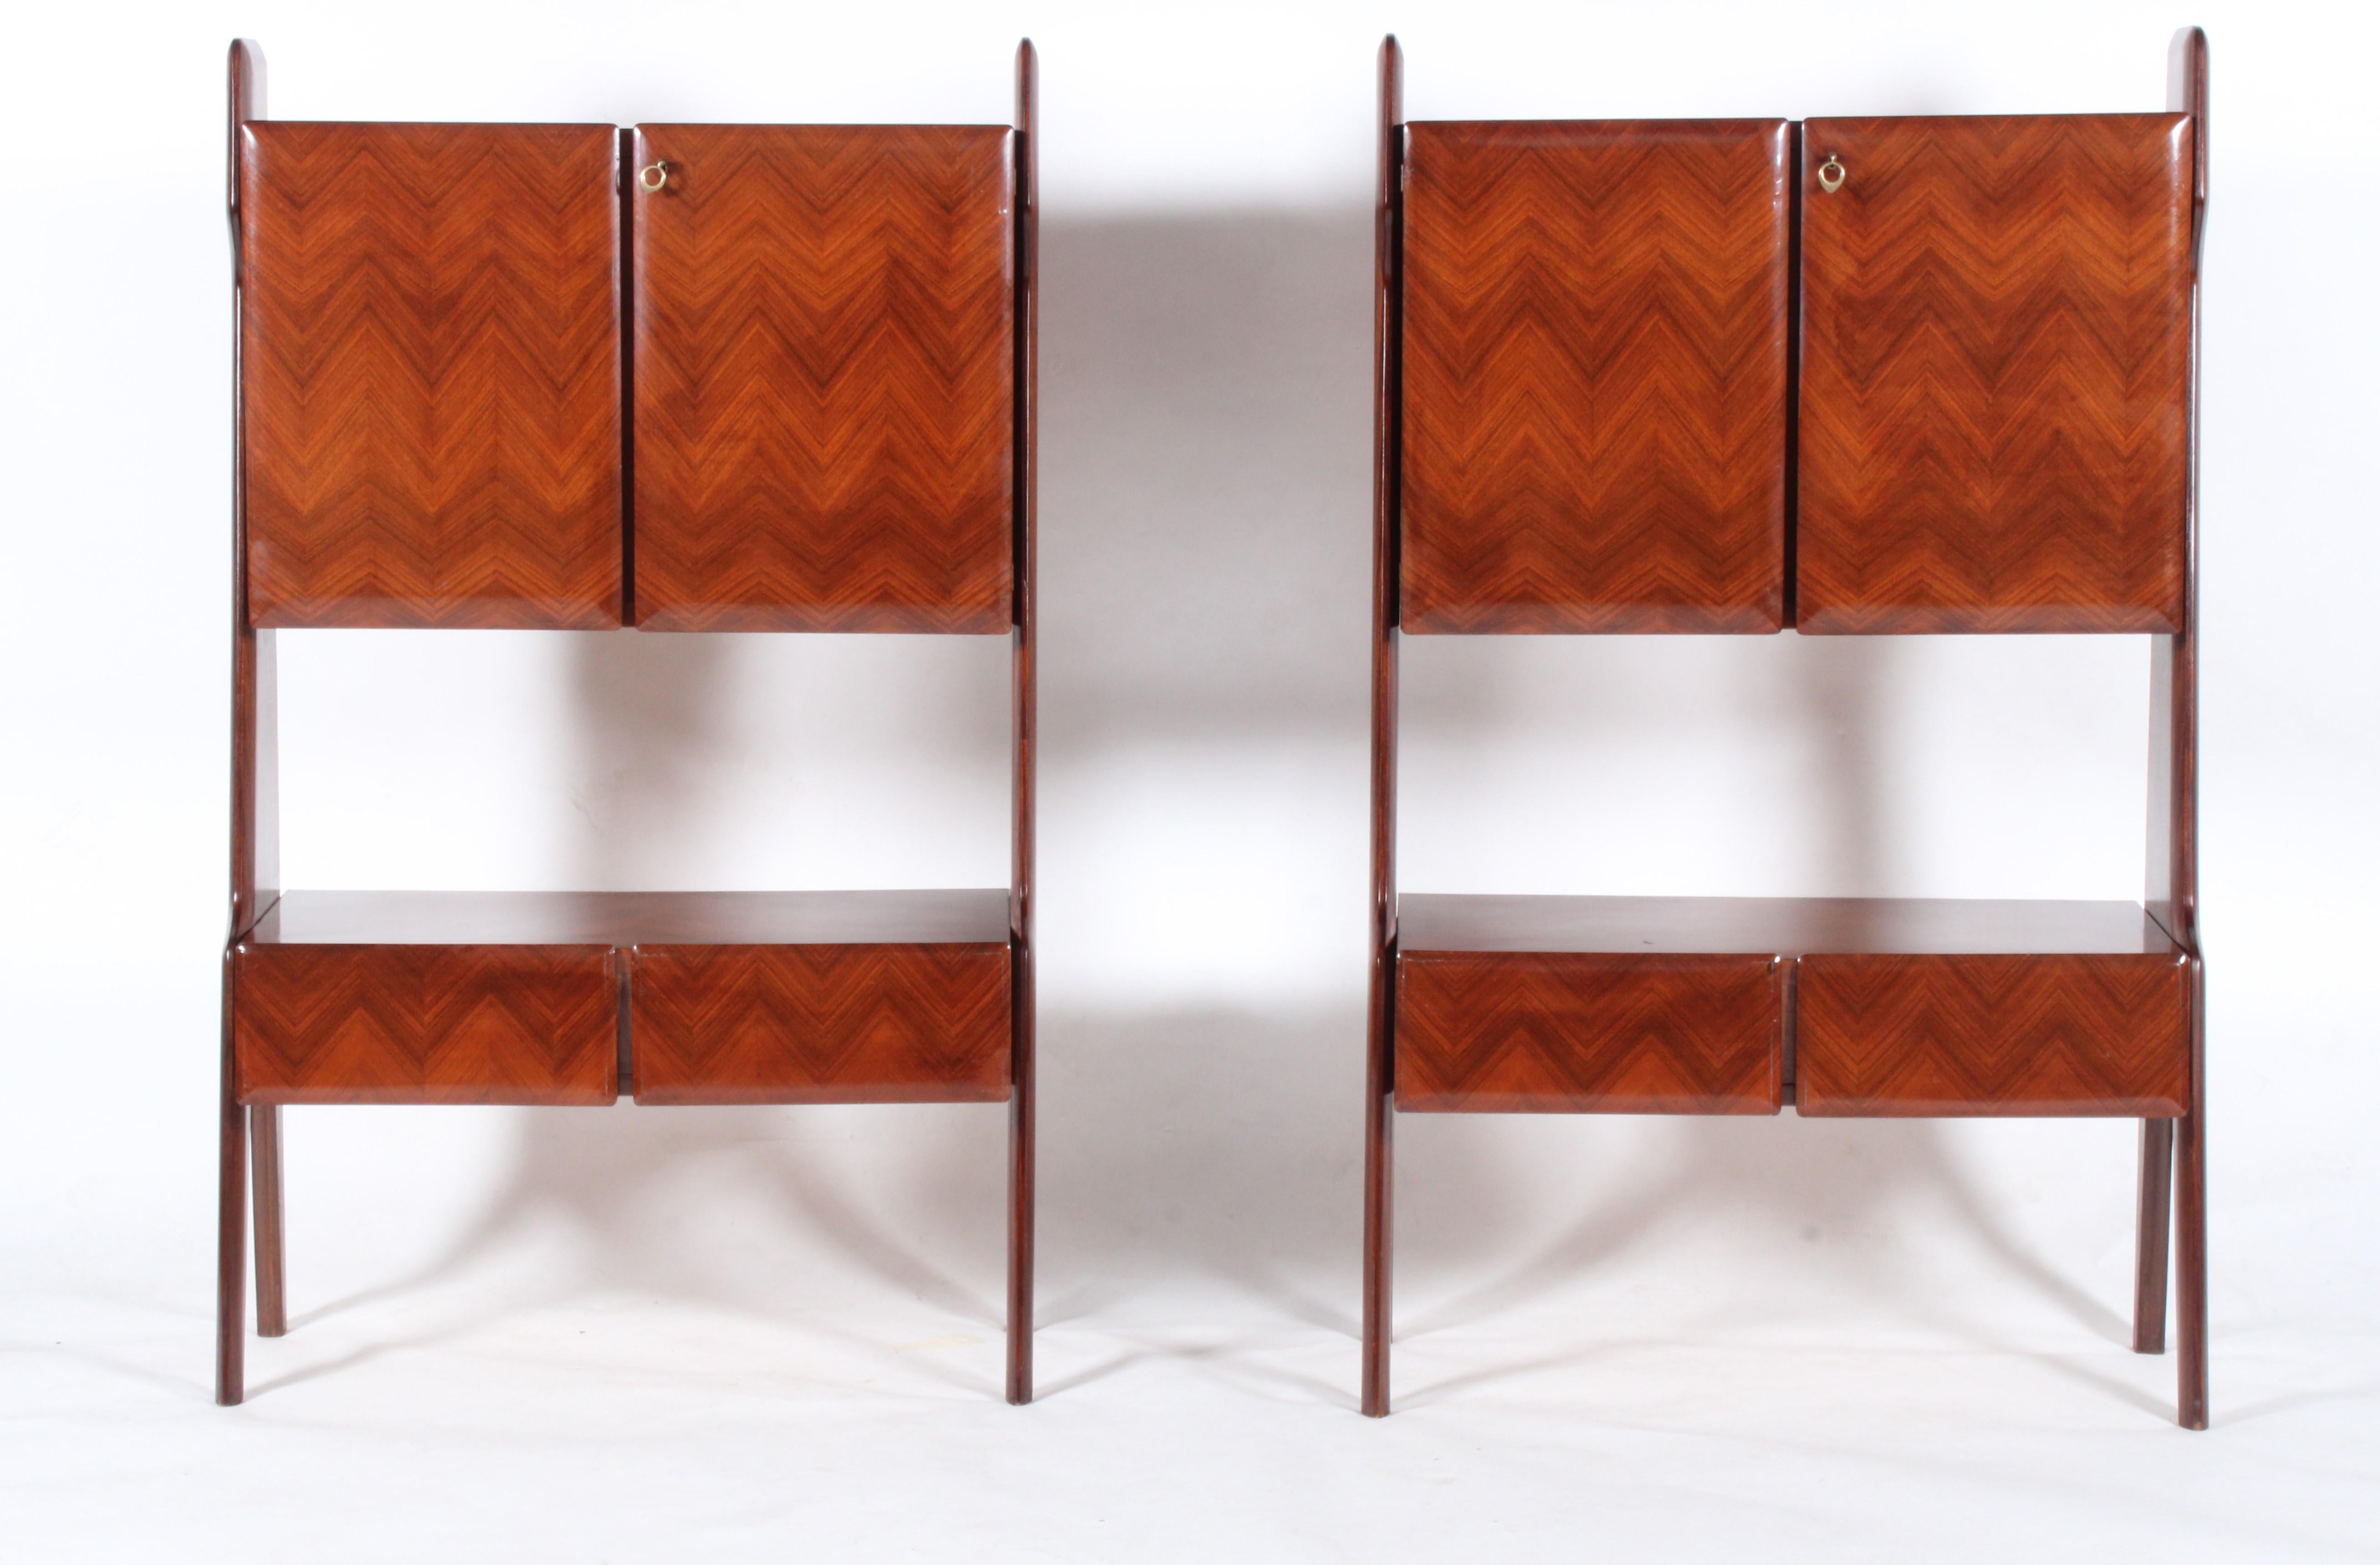 Sourced from a private collector in the beautiful city of Savona, this rare and magnificent pair of authentic mid century Italian free standing storage units are a very special find and we are truly delighted to offer them for sale in our